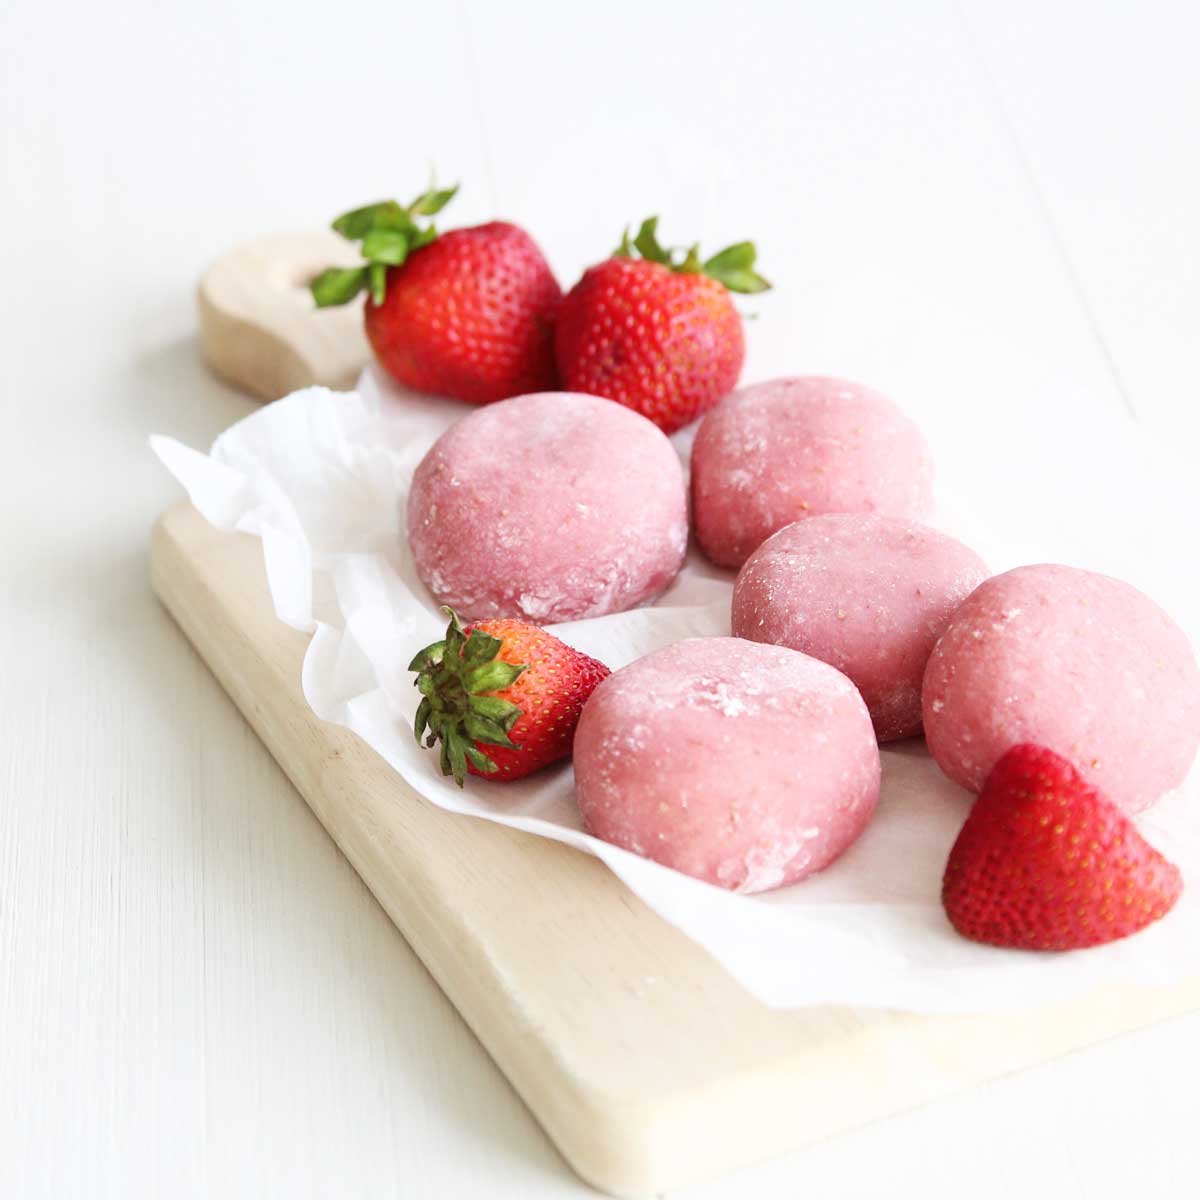 How to Make Healthy Strawberry Mochi (Made in the Microwave) - Chocolate Steamed Buns